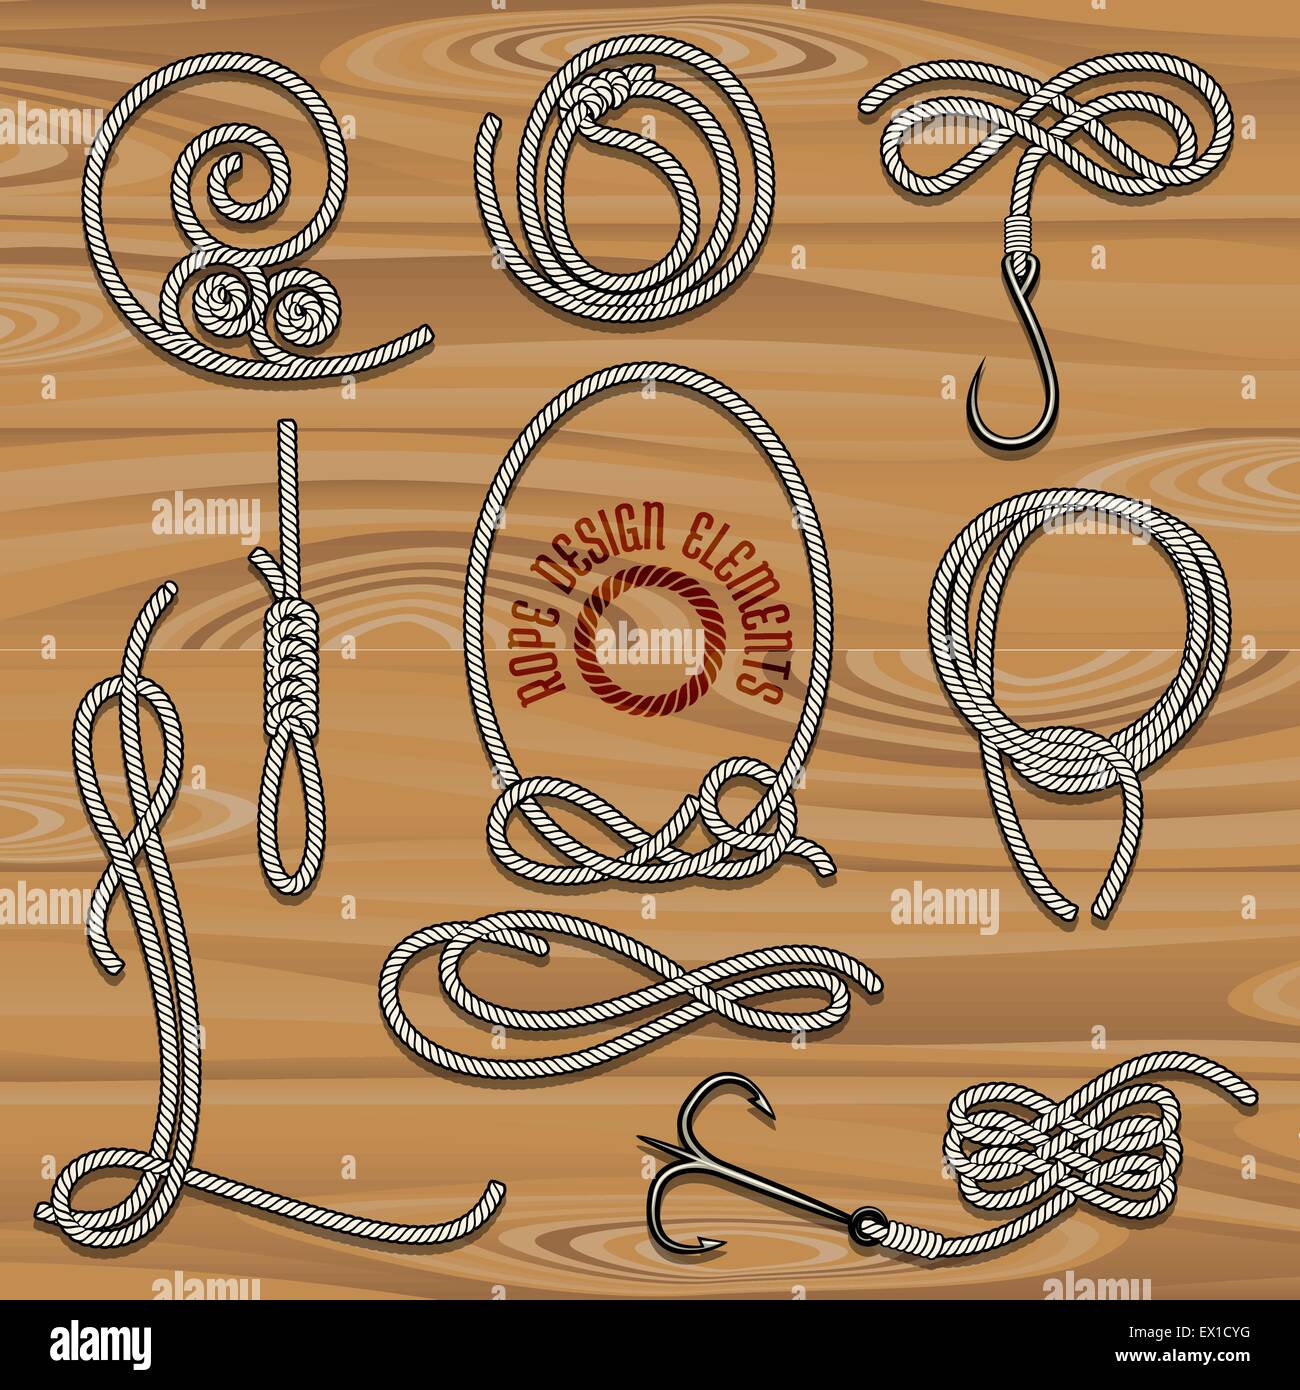 Collection of Rope Design elements. Drawn in vintage style. Knots, loops and hooks. Free font used. Stock Vector